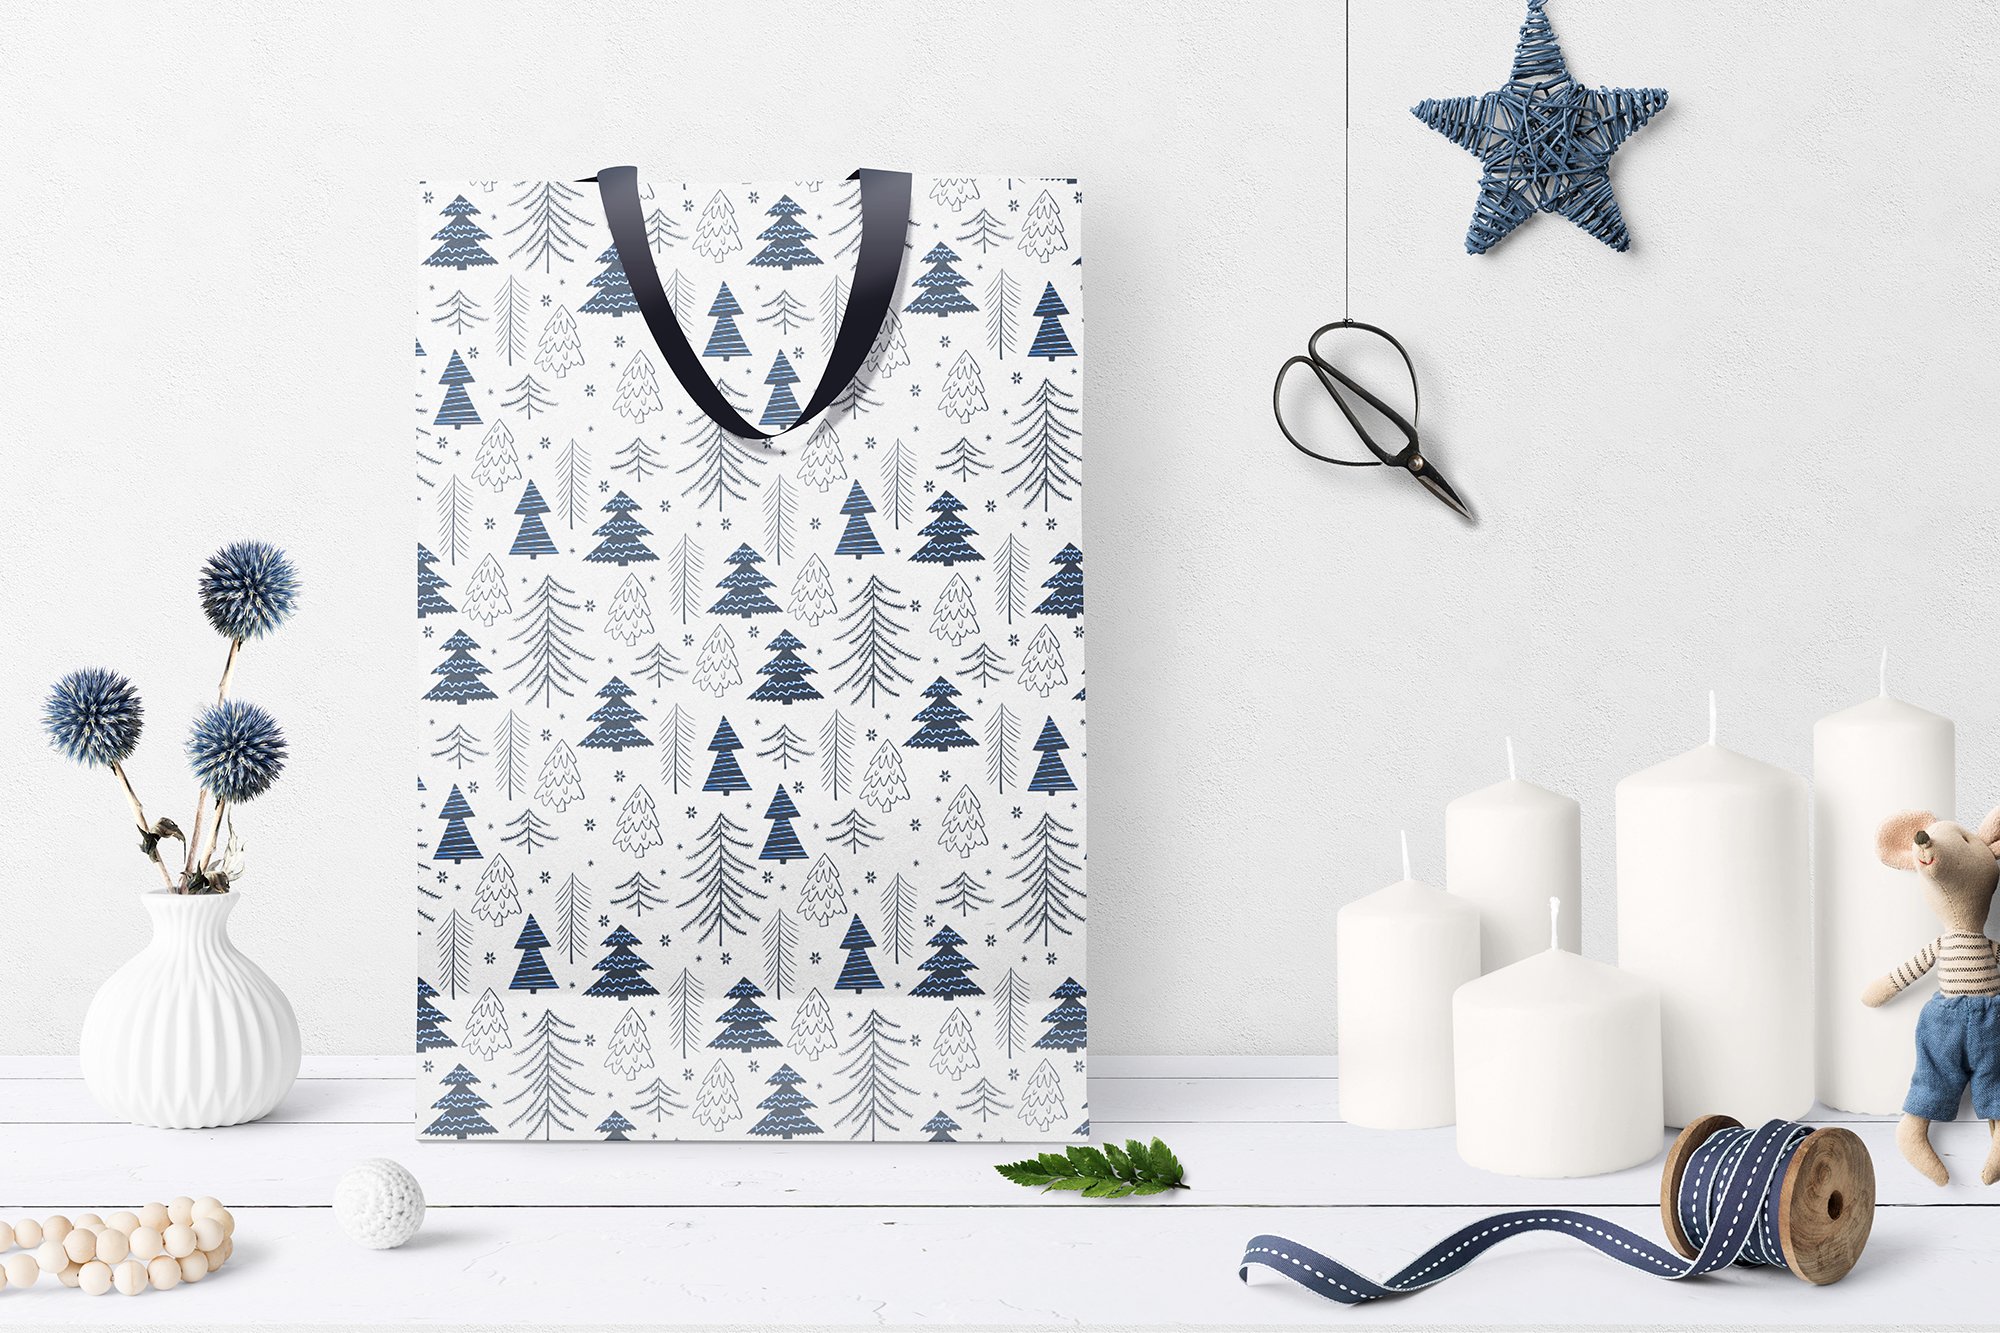 Cute patterns for festive package.